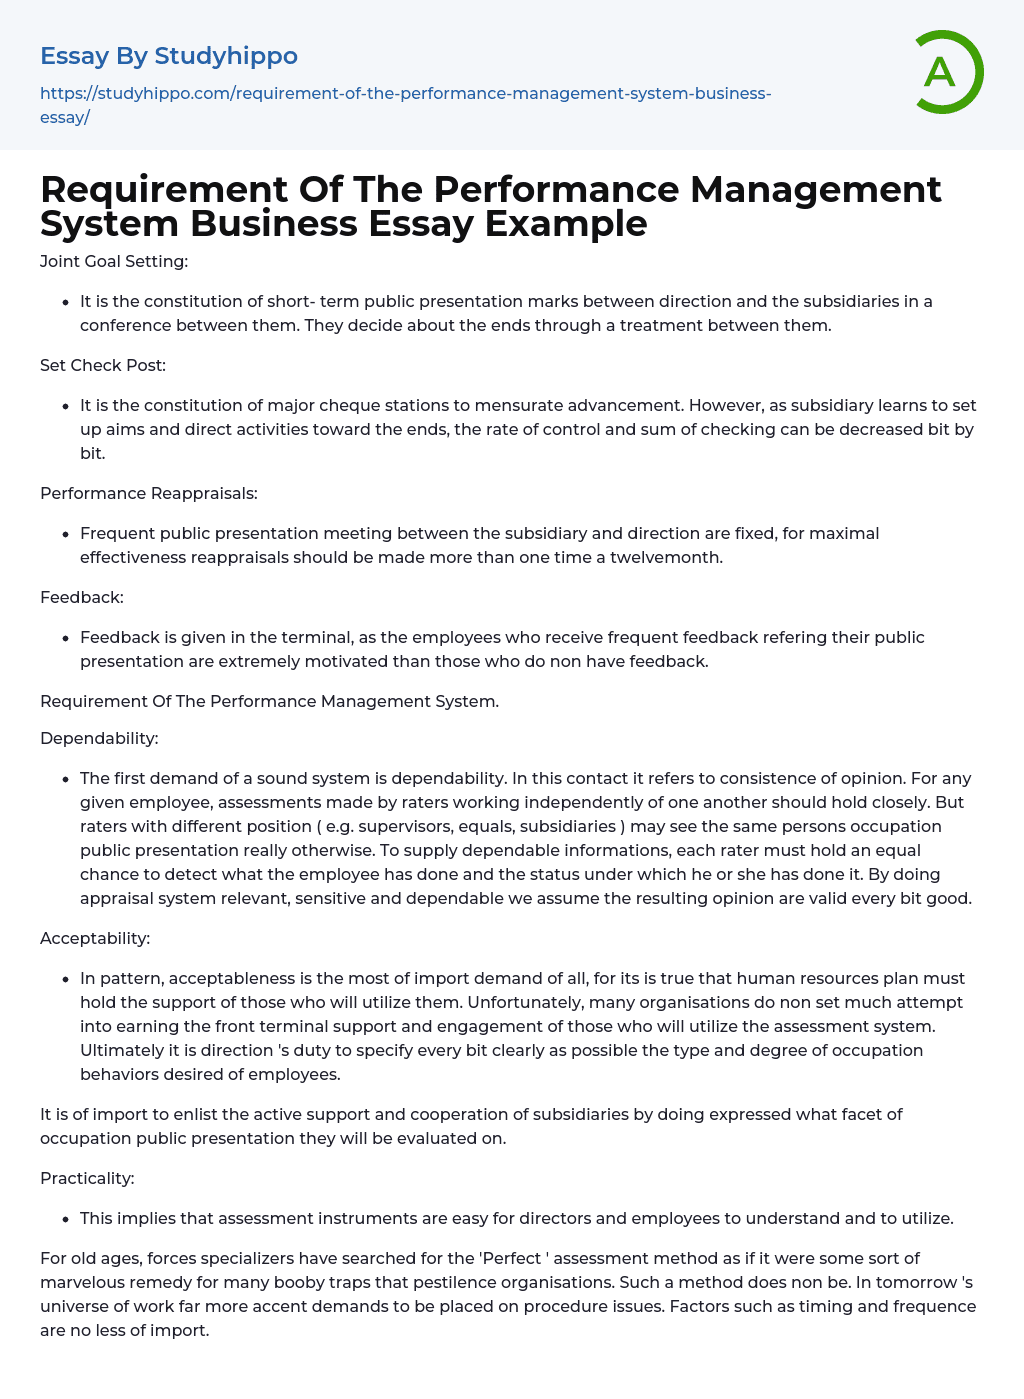 Requirement Of The Performance Management System Business Essay Example